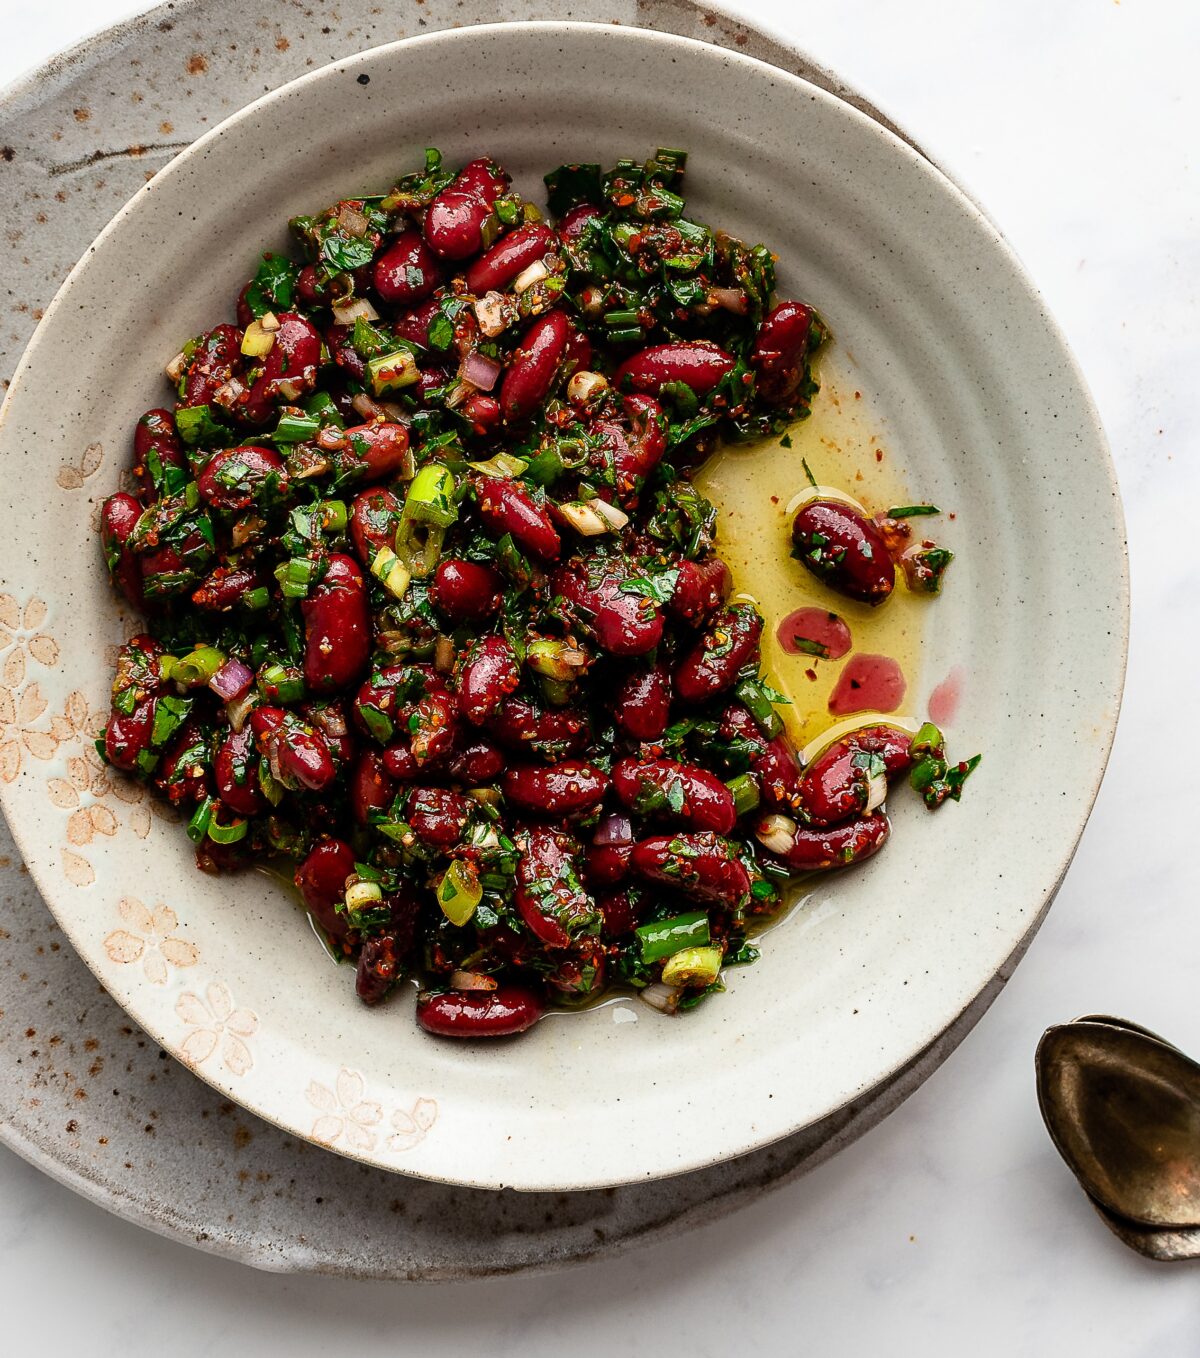 Balance the earthy flavor of kidney beans with the sharpness of red wine vinegar and the lift of fresh herbs. (Jennifer McGruther)